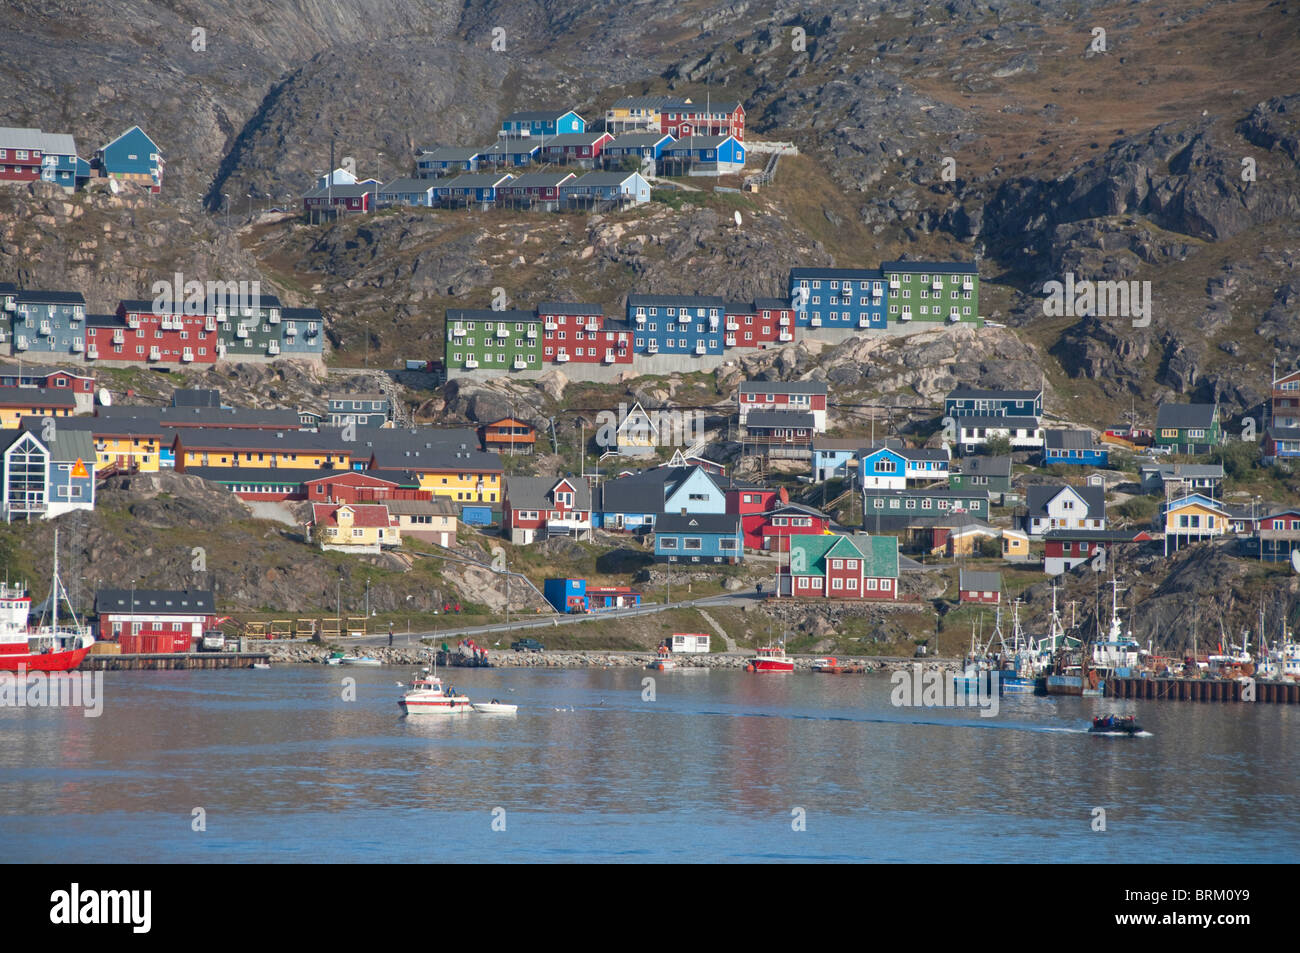 Greenland, Qaqortoq. South Greenland's largest town with almost 3,000 inhabitants. Coastal view of port area. Stock Photo